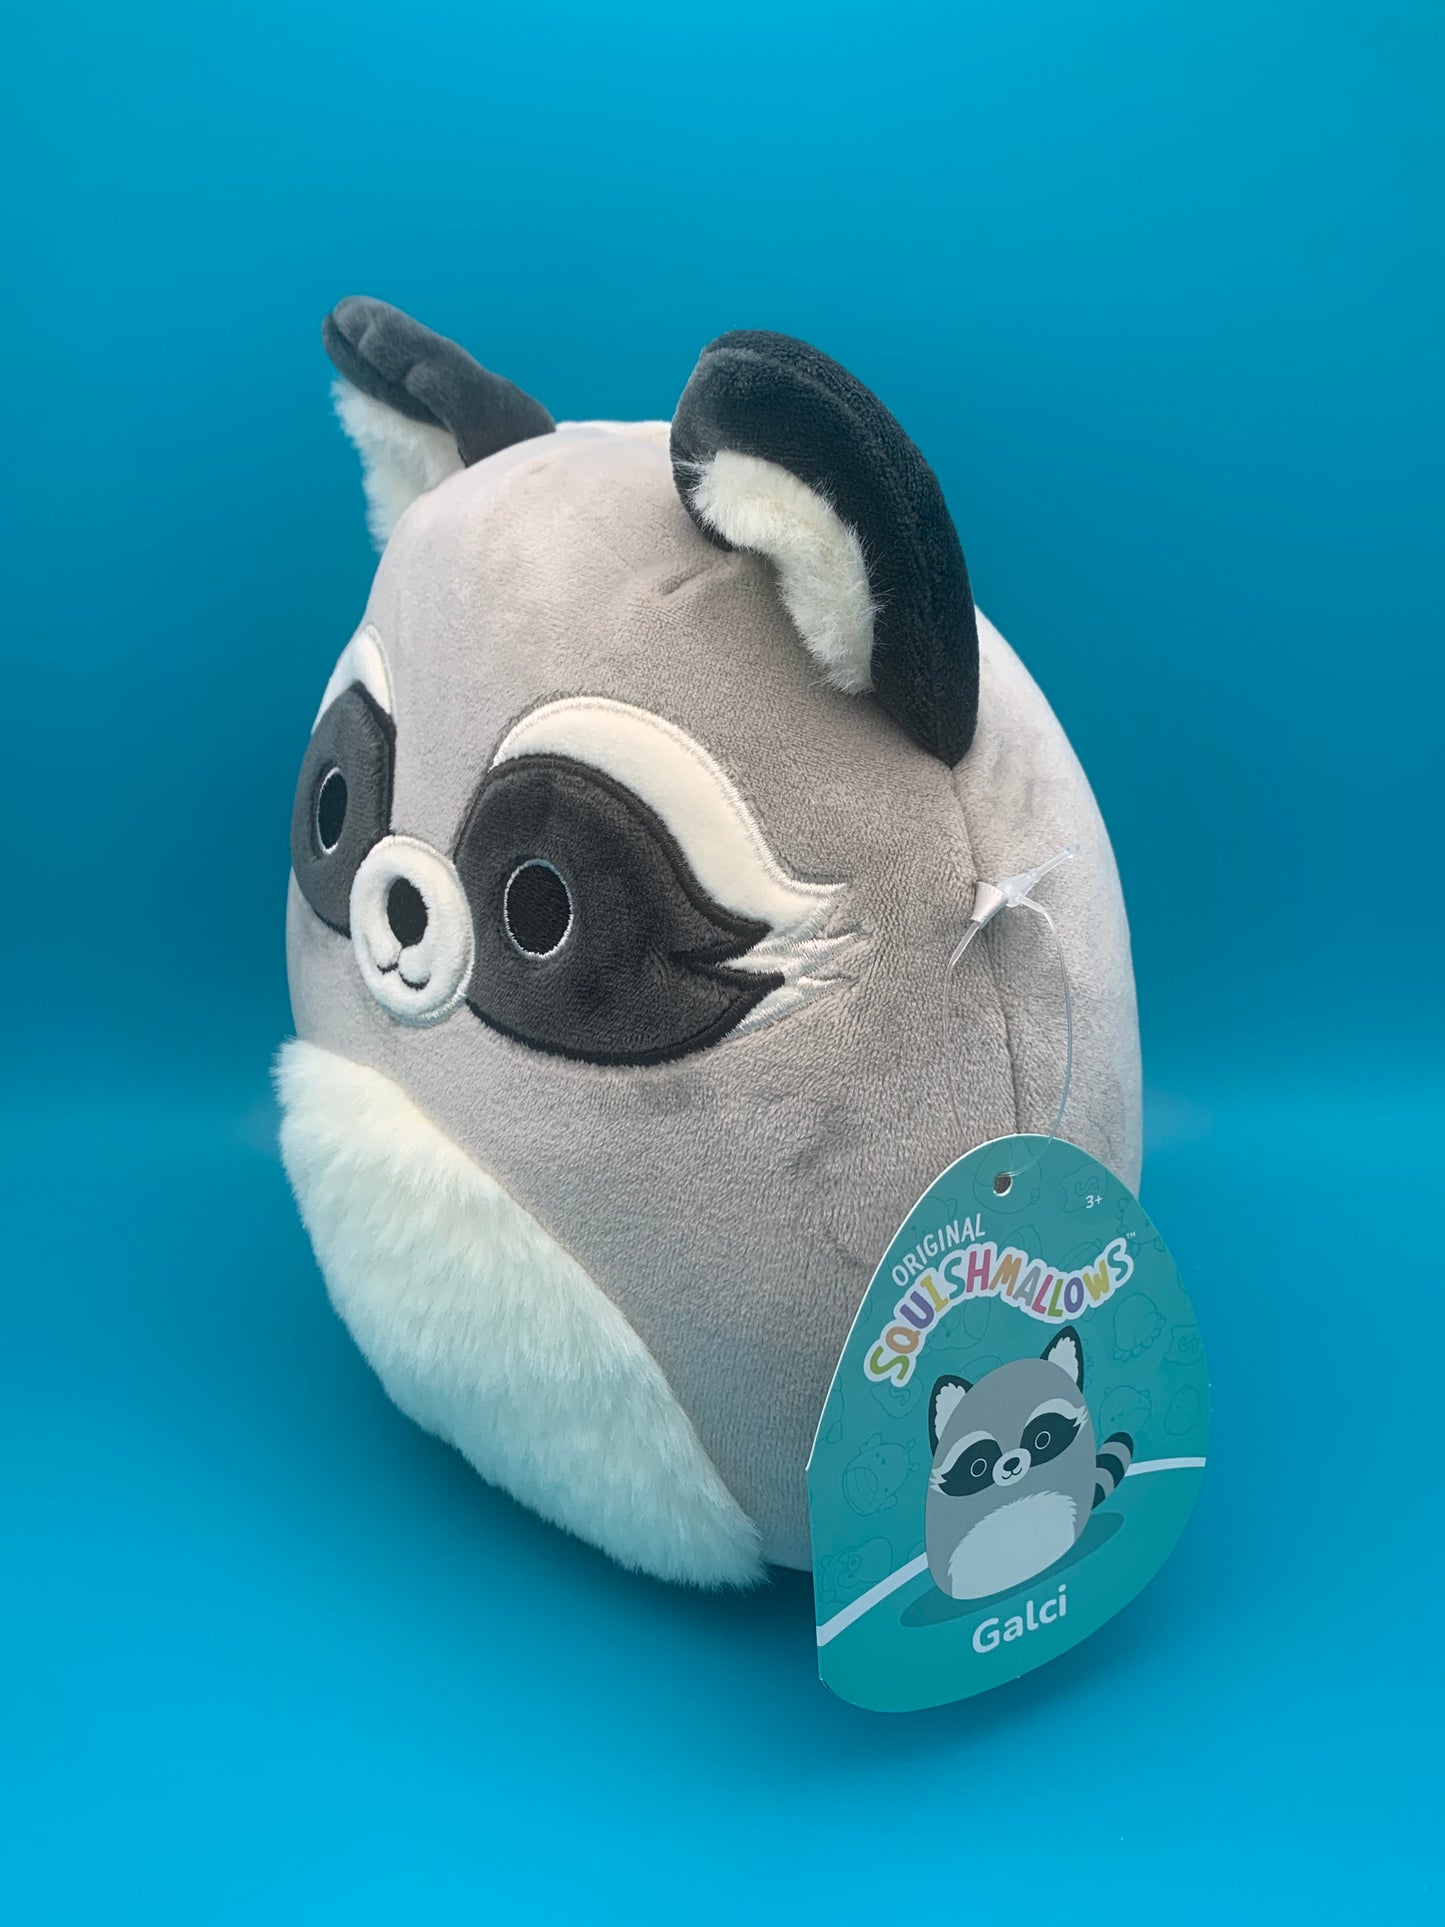 Squishmallow Galci the Raccoon 7.5 inch